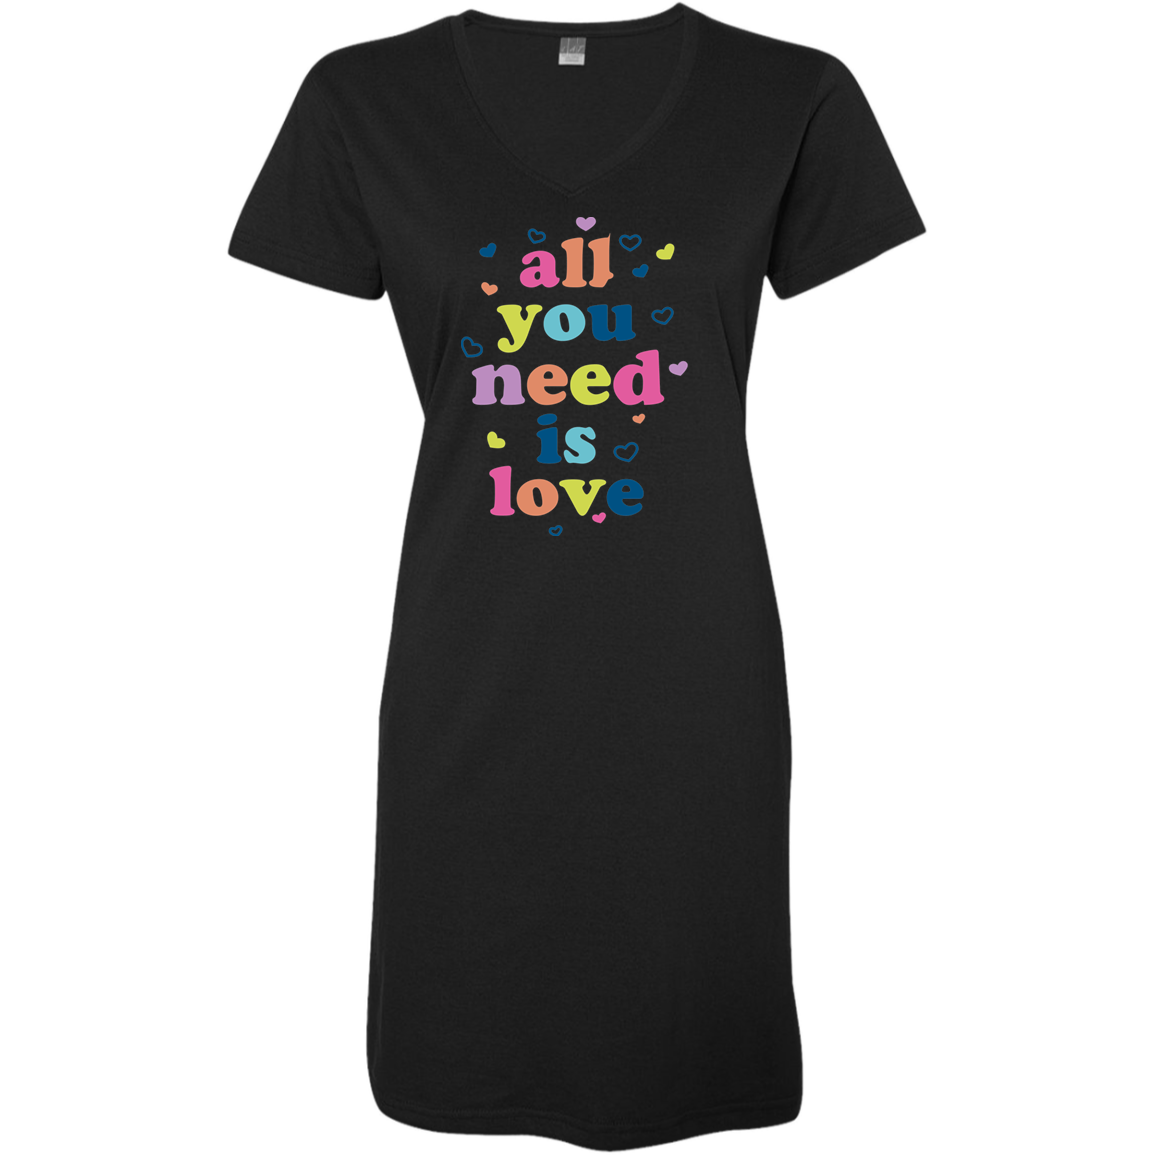 All You Need Is Love Ladies' V-Neck Fine Jersey Cover-Up